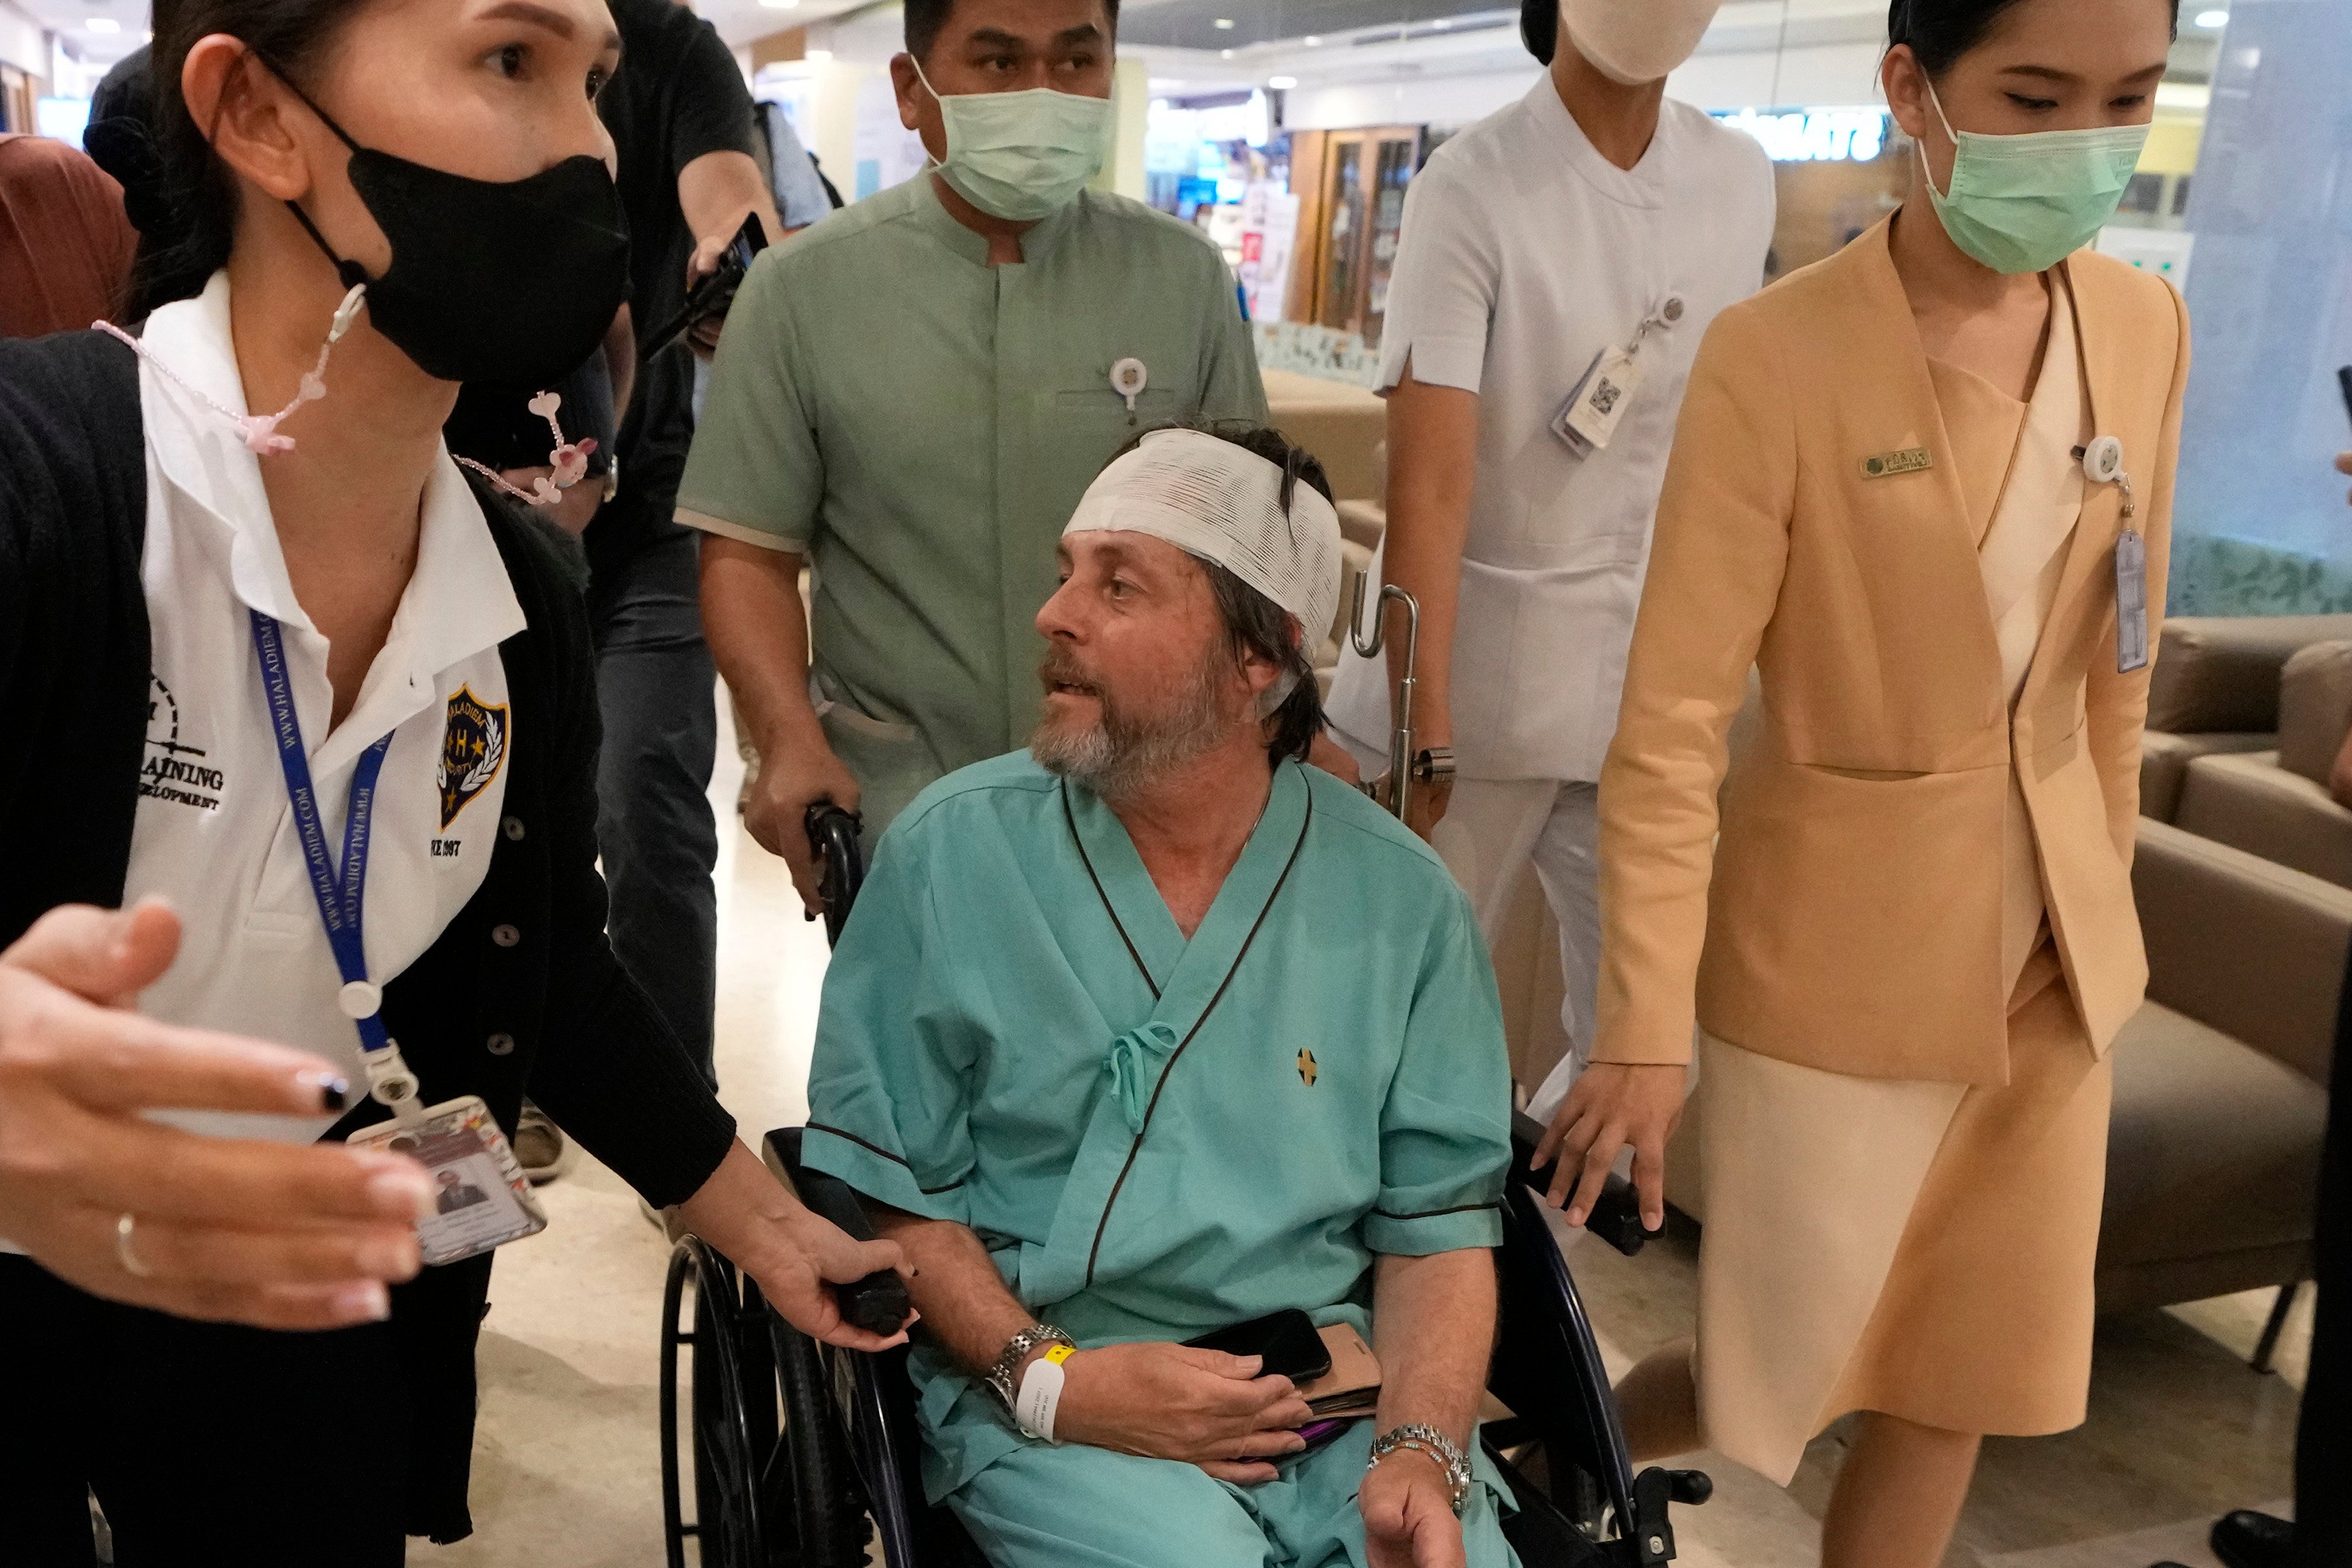 An Australian passenger, who was injured on a flight that was battered by severe turbulence, talks to reporters at Samitivej Srinakarin Hospital in Bangkok, Thailand on Thursday. Photo: AP